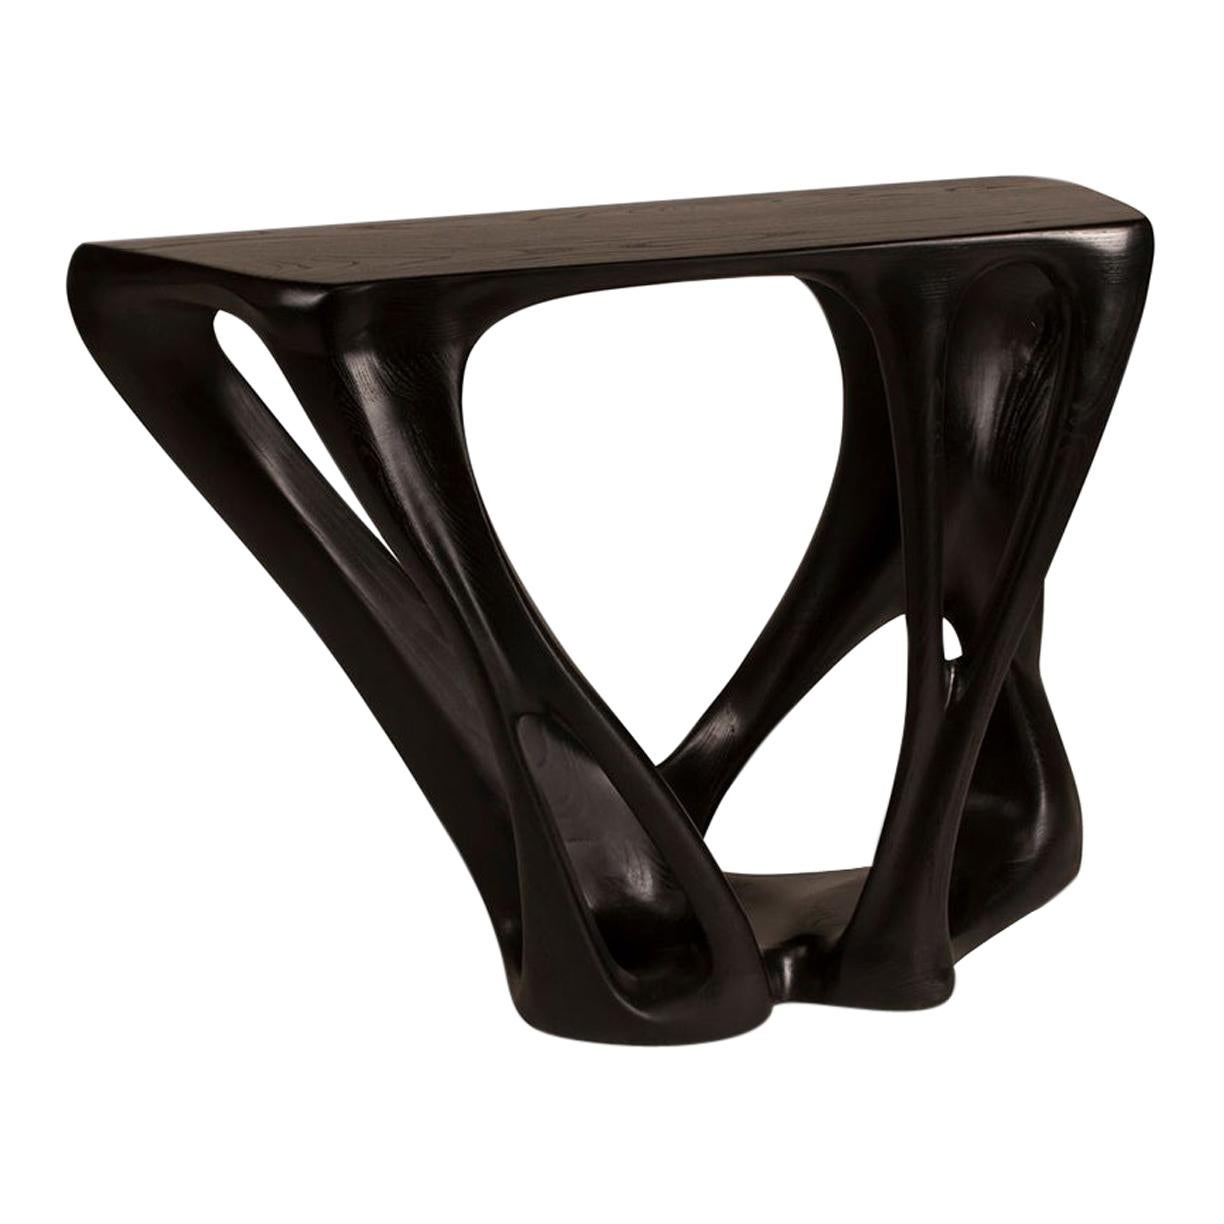 Amorph Petra Console Table, Ebony Stained